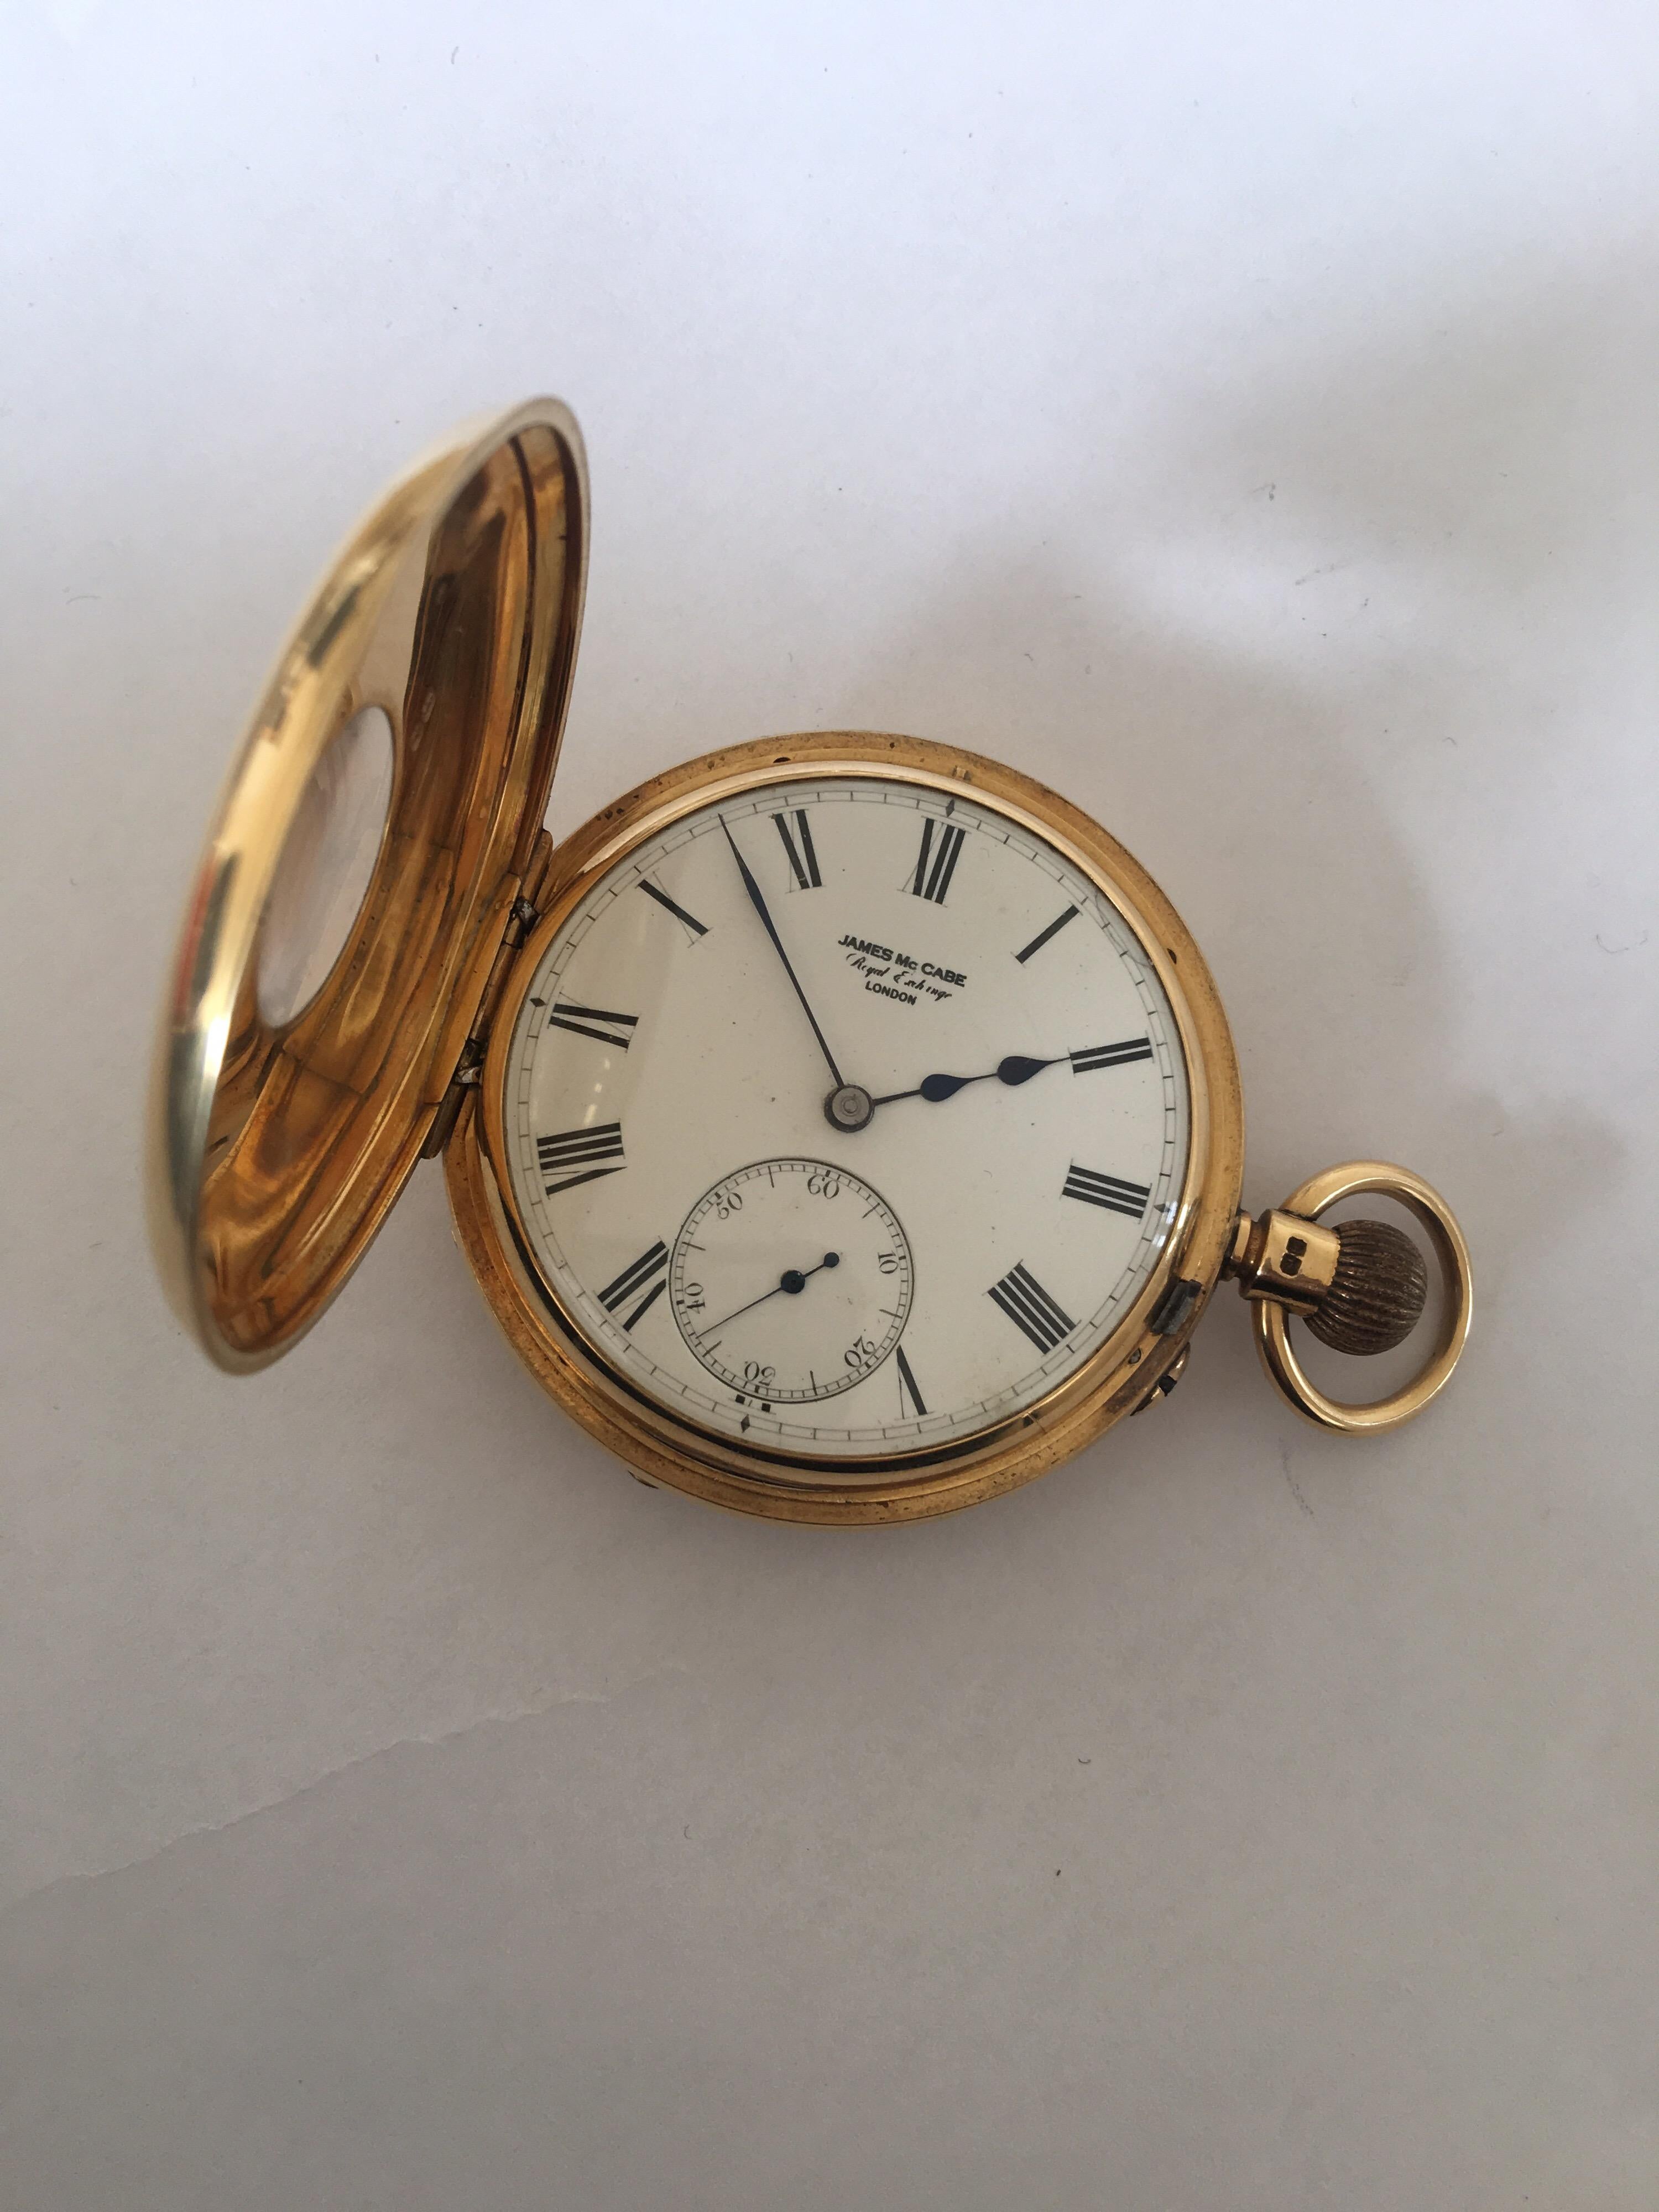 8K Gold Antique Half Hunter Pocket Watch Signed James McCabe, Royal Exchange London on the Dial

This watch is in good working order and it is ticking nicely but we cannot guarantee the time accuracy 